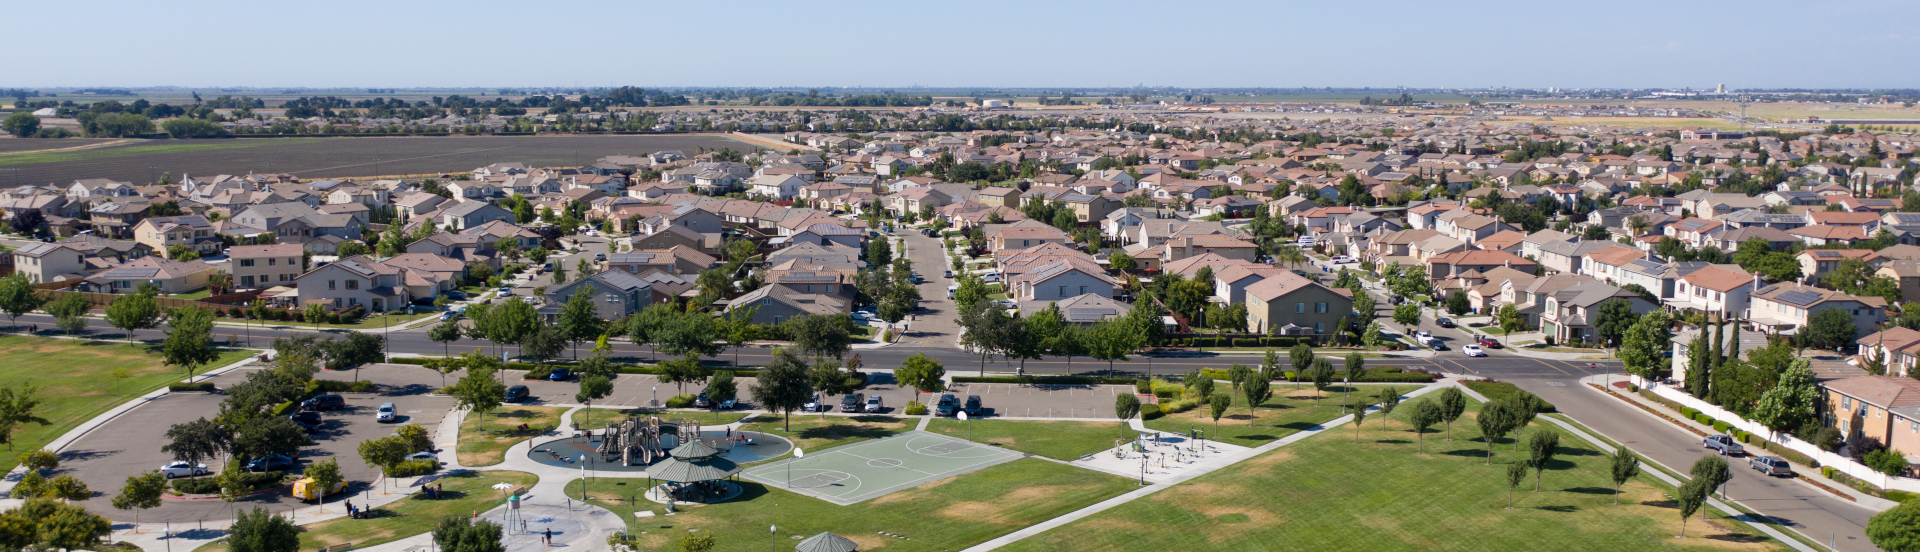 Arial view of a housing development